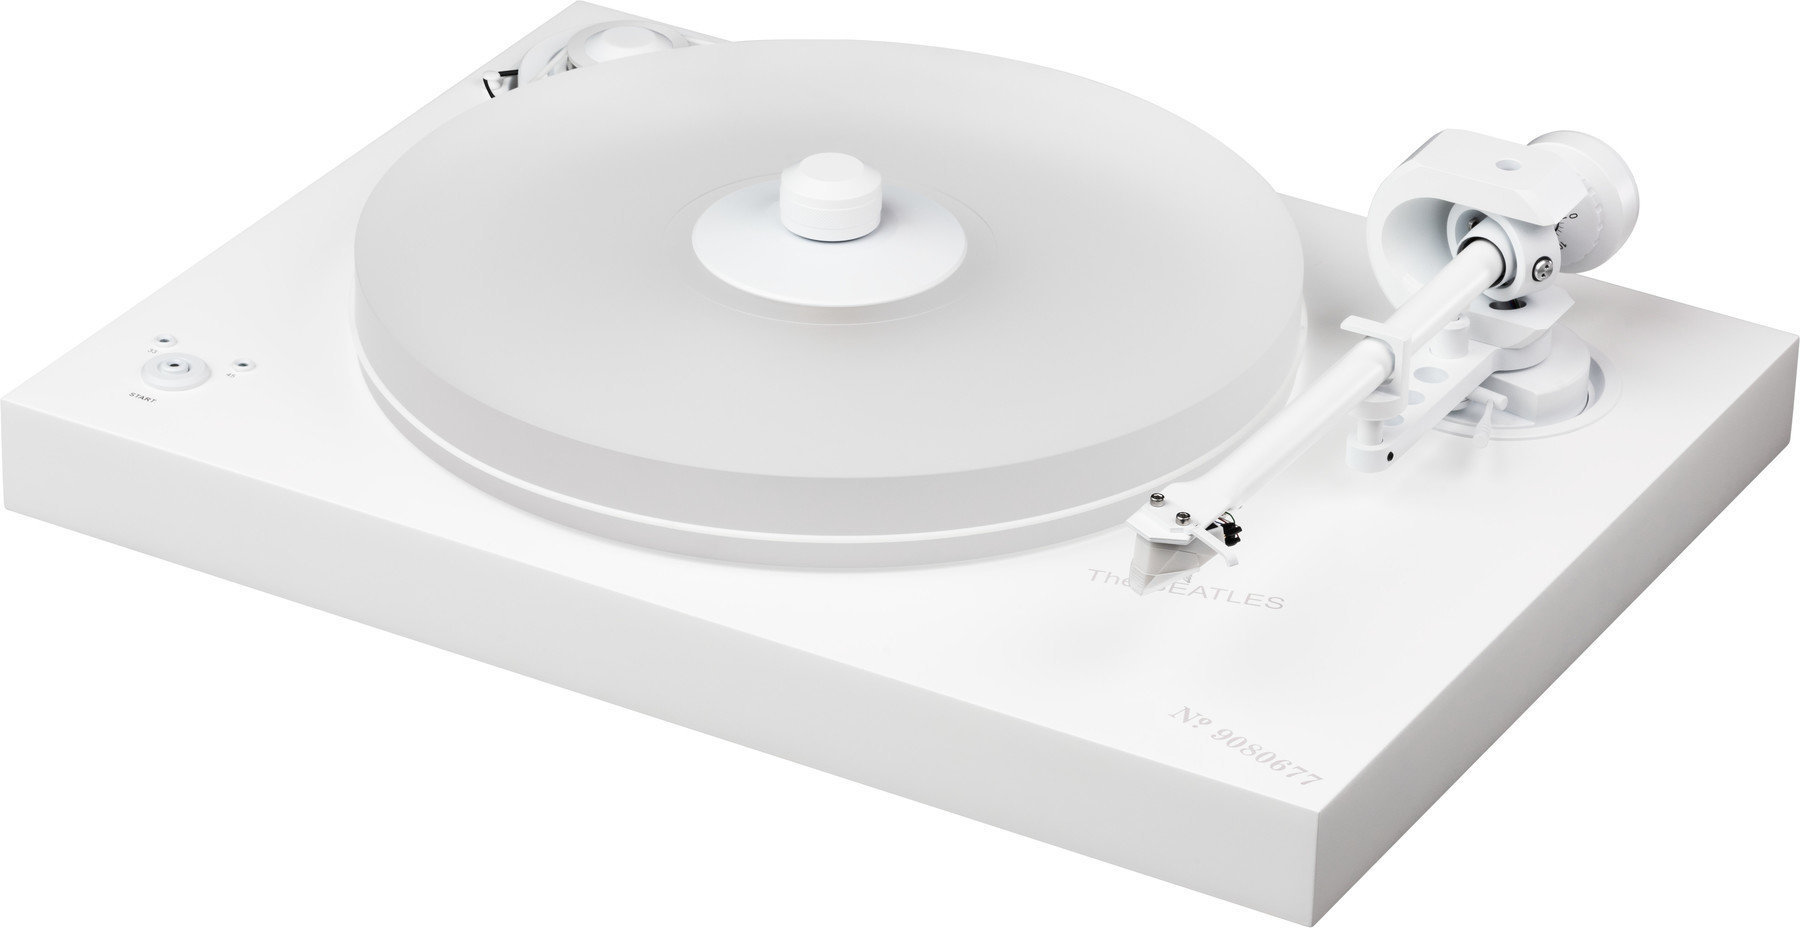 Hi-Fi-Drehscheibe Pro-Ject 2Xperience The Beatles White Album 2M Weiß